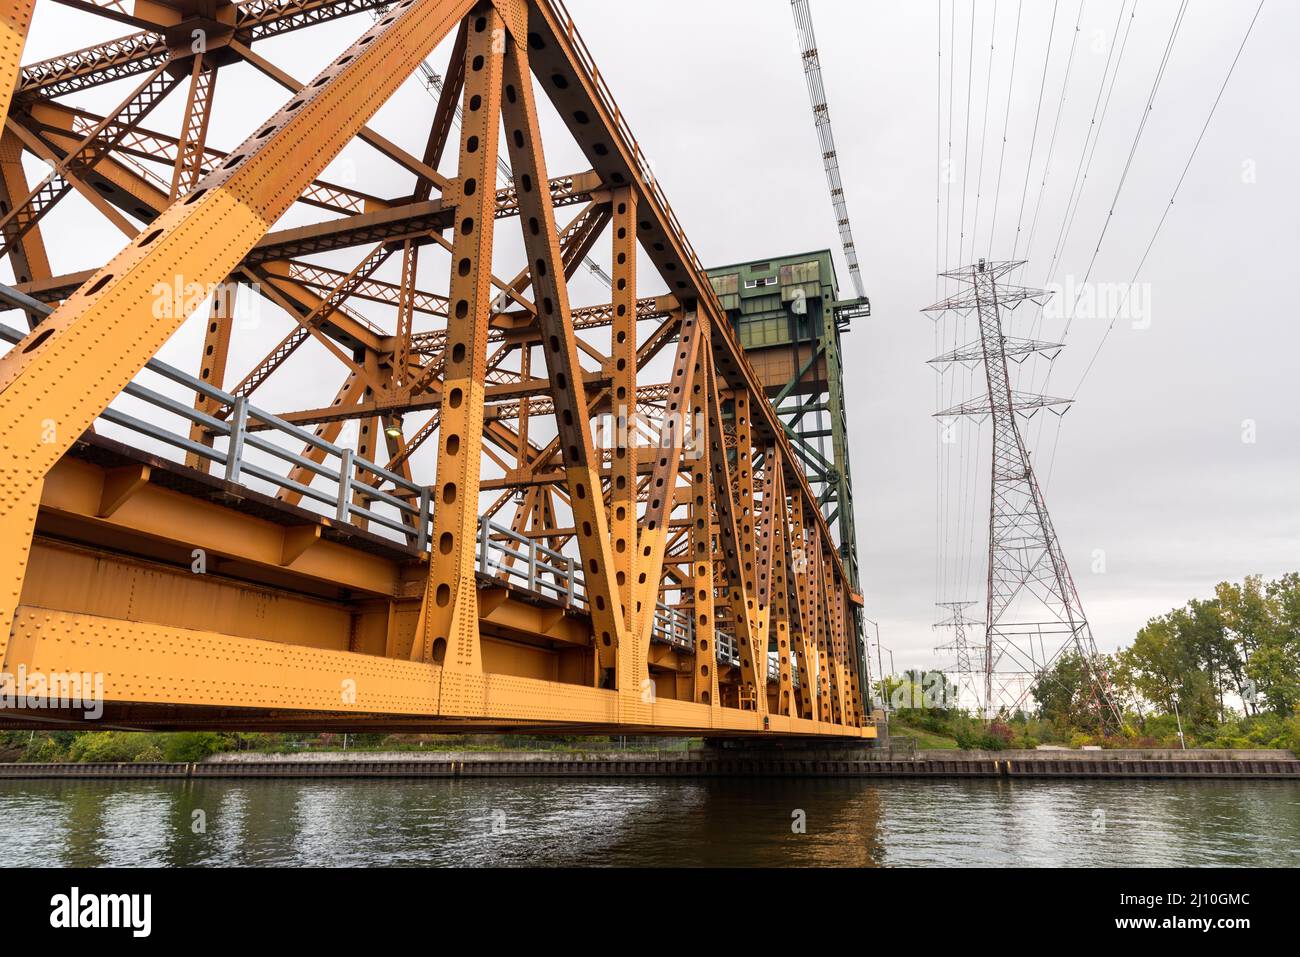 Low angle view of a vertical lift road bridge over a canal Stock Photo